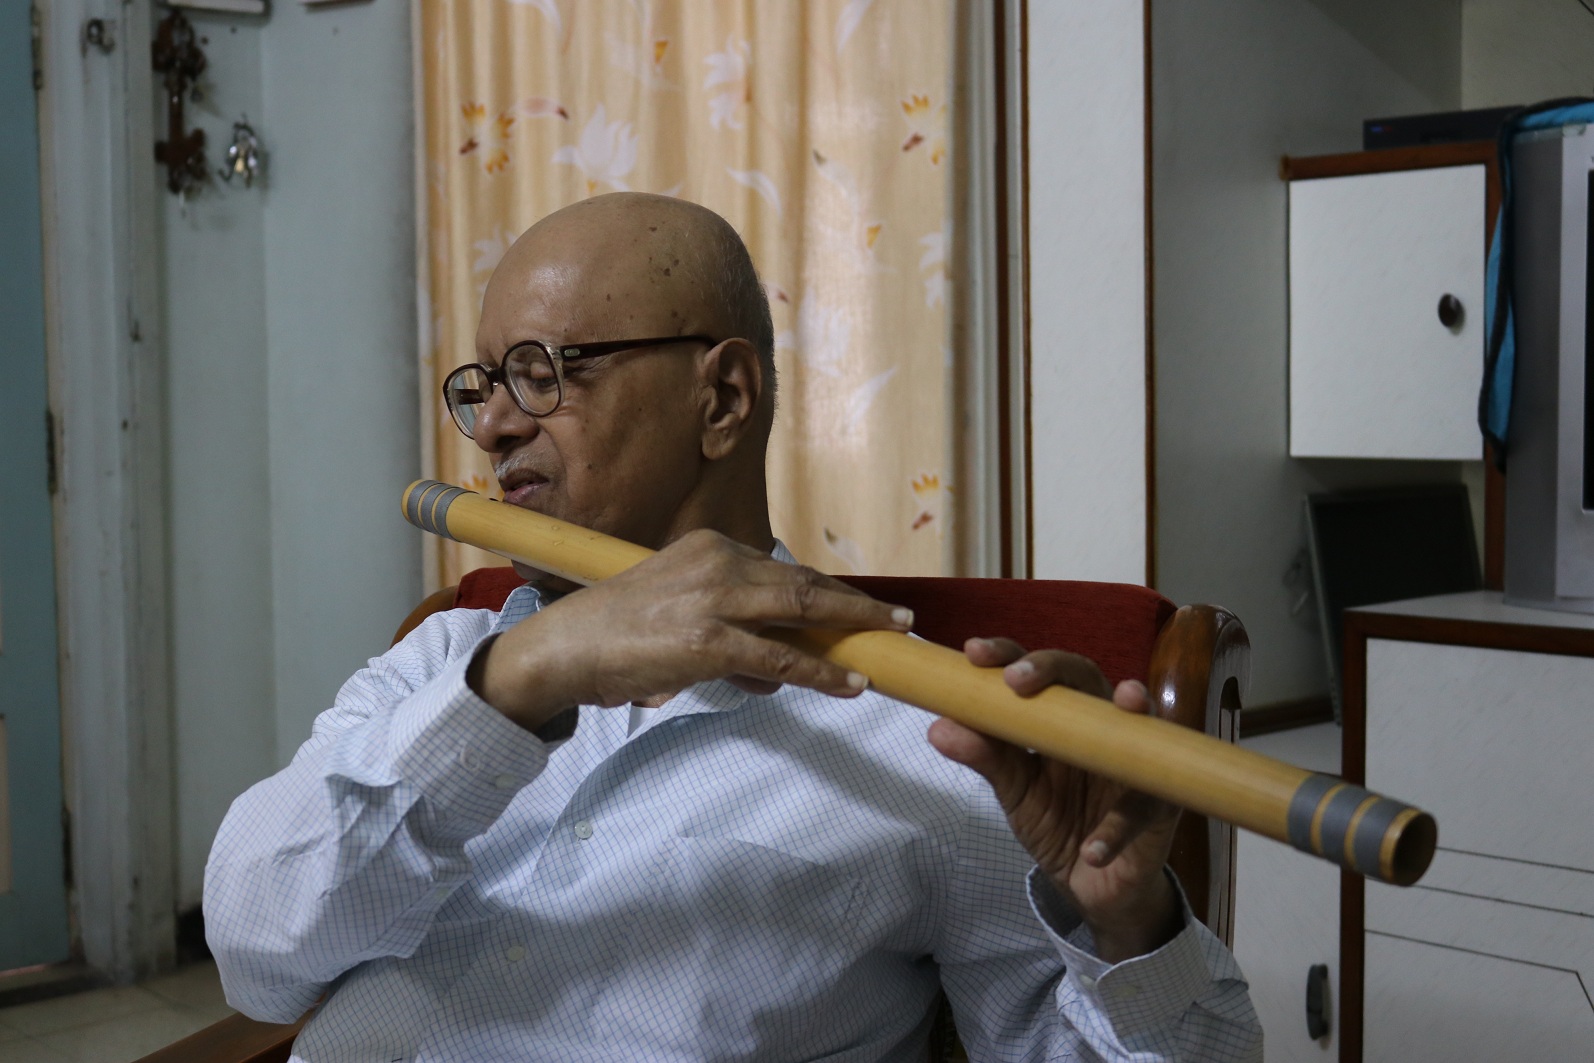 75-year-old visually-impaired artist plays flute & draws sketches